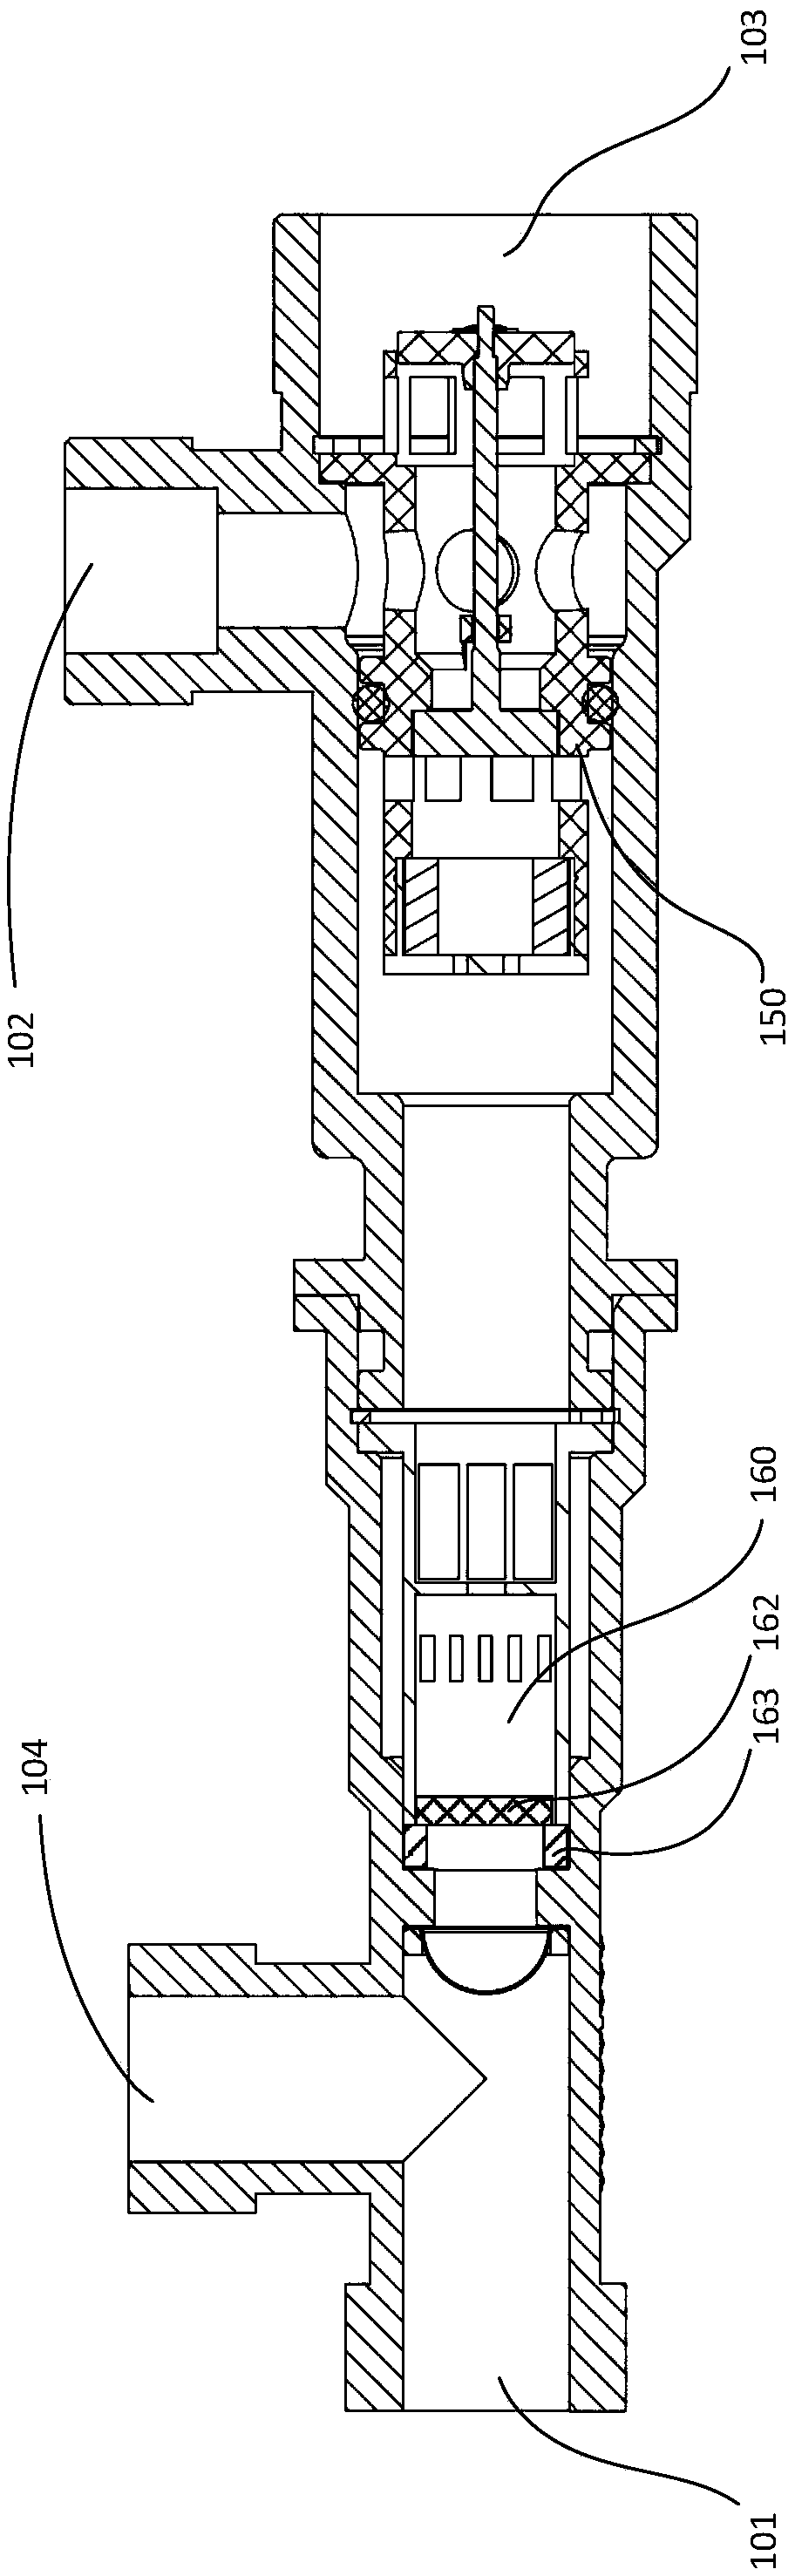 Valve and hot water system thereof